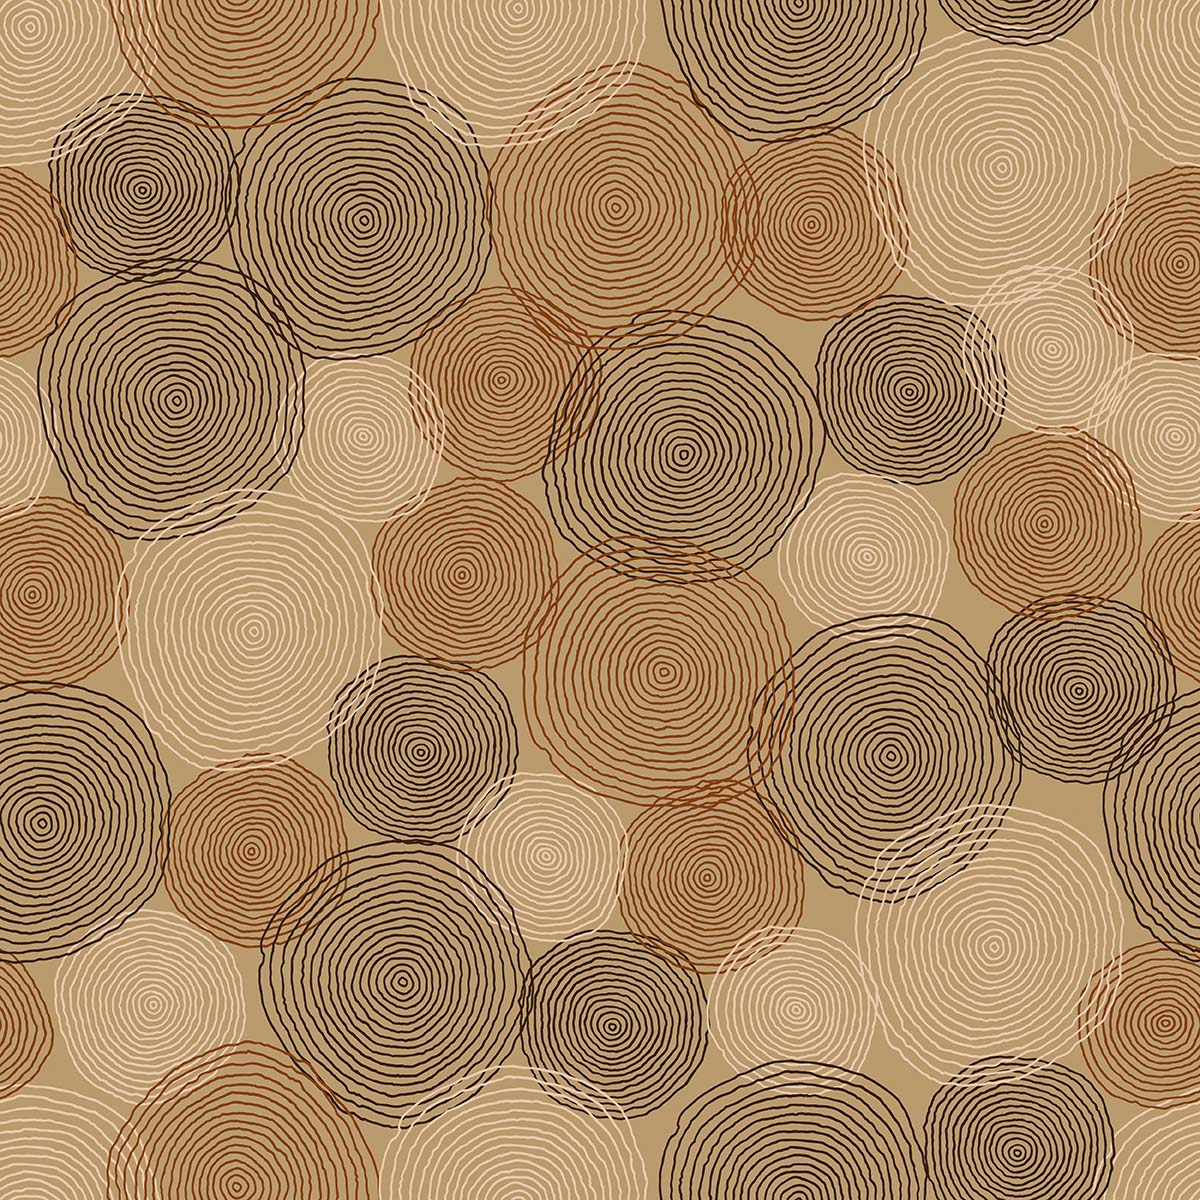 A pattern of circles on a beige background